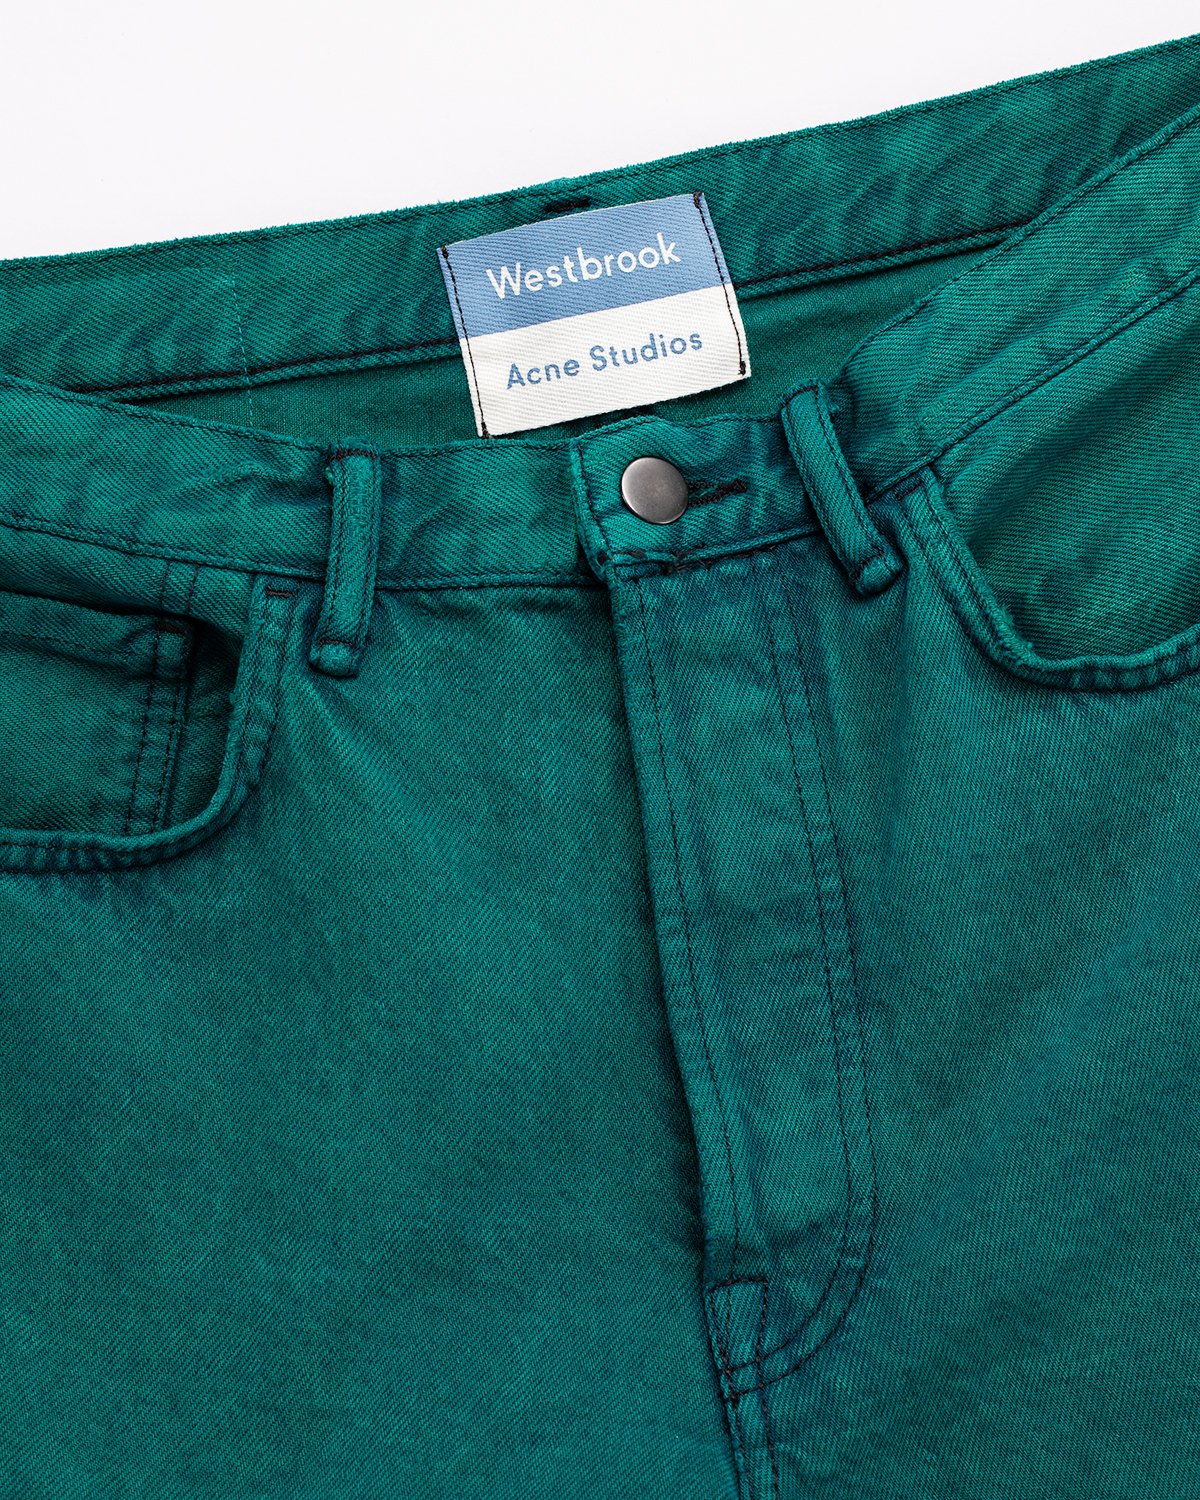 Acne Studios - Overdyed Jeans Jade Green - Clothing - Green - Image 3